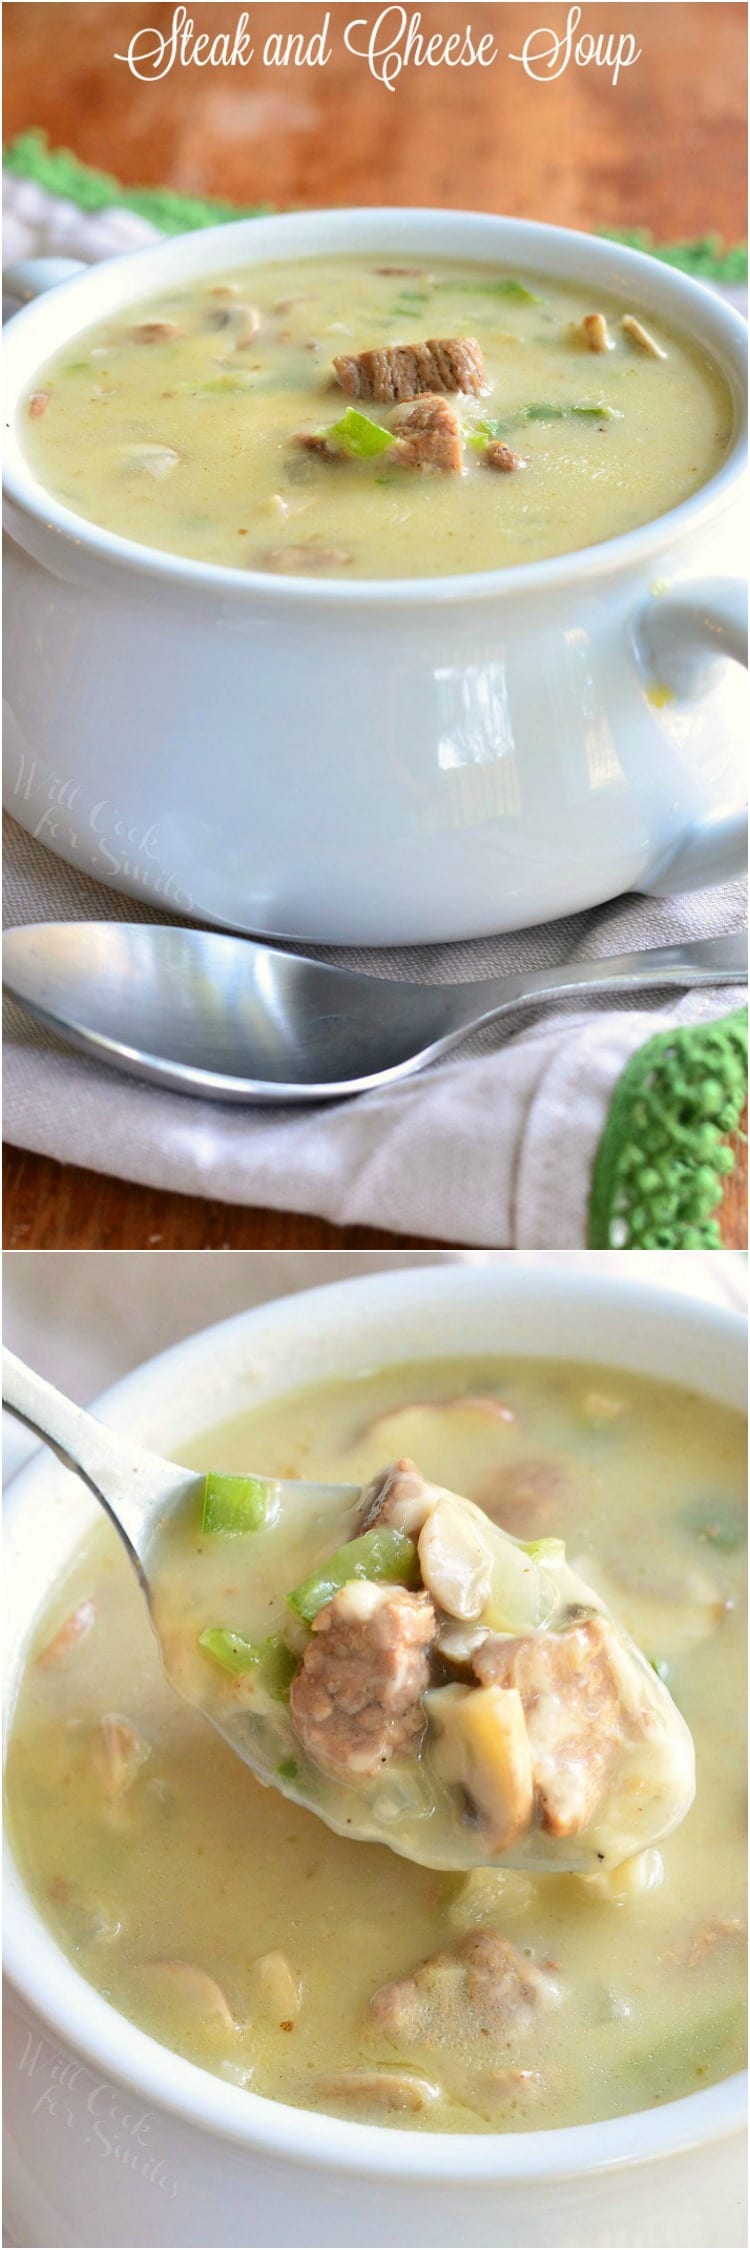 Collage top photo Steak and Cheese Soup in a white bowl bottom photo spooning some soup out 